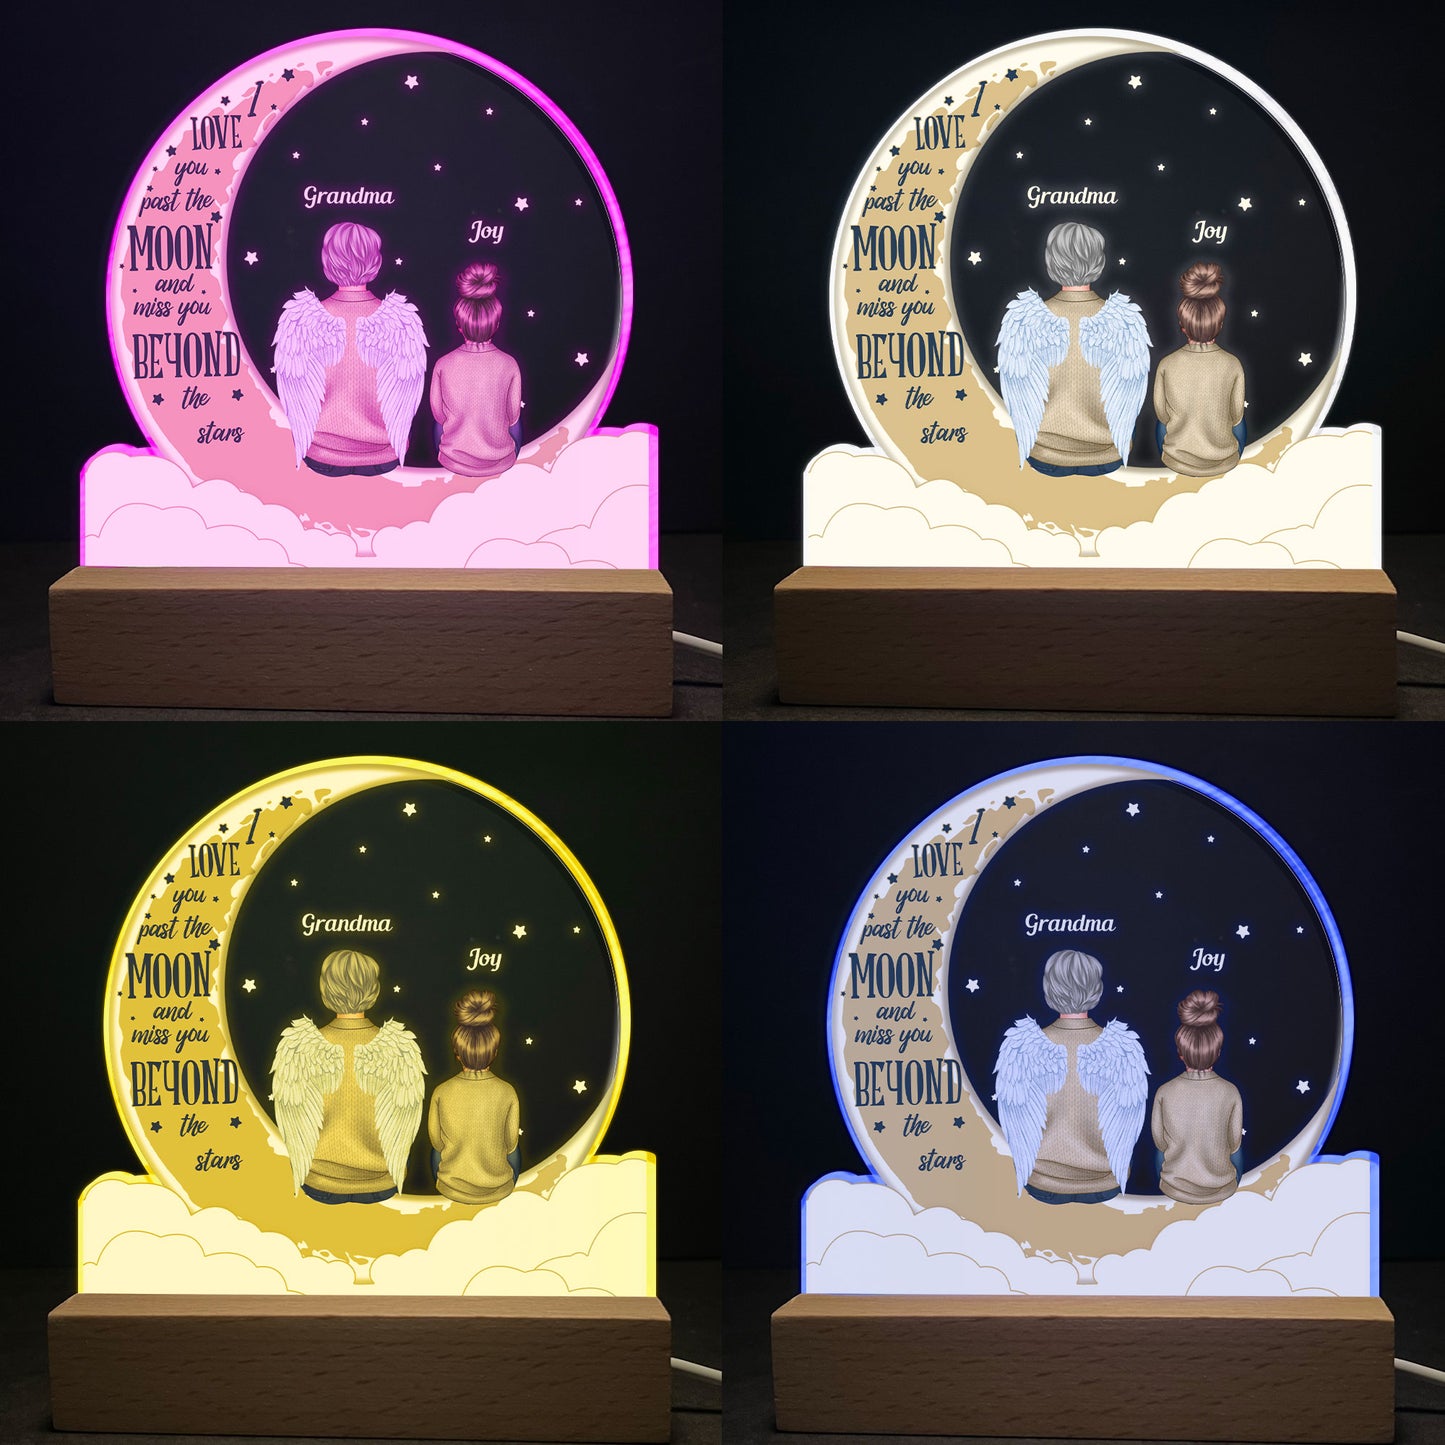 I Love You Past The Moon - Personalized LED Light